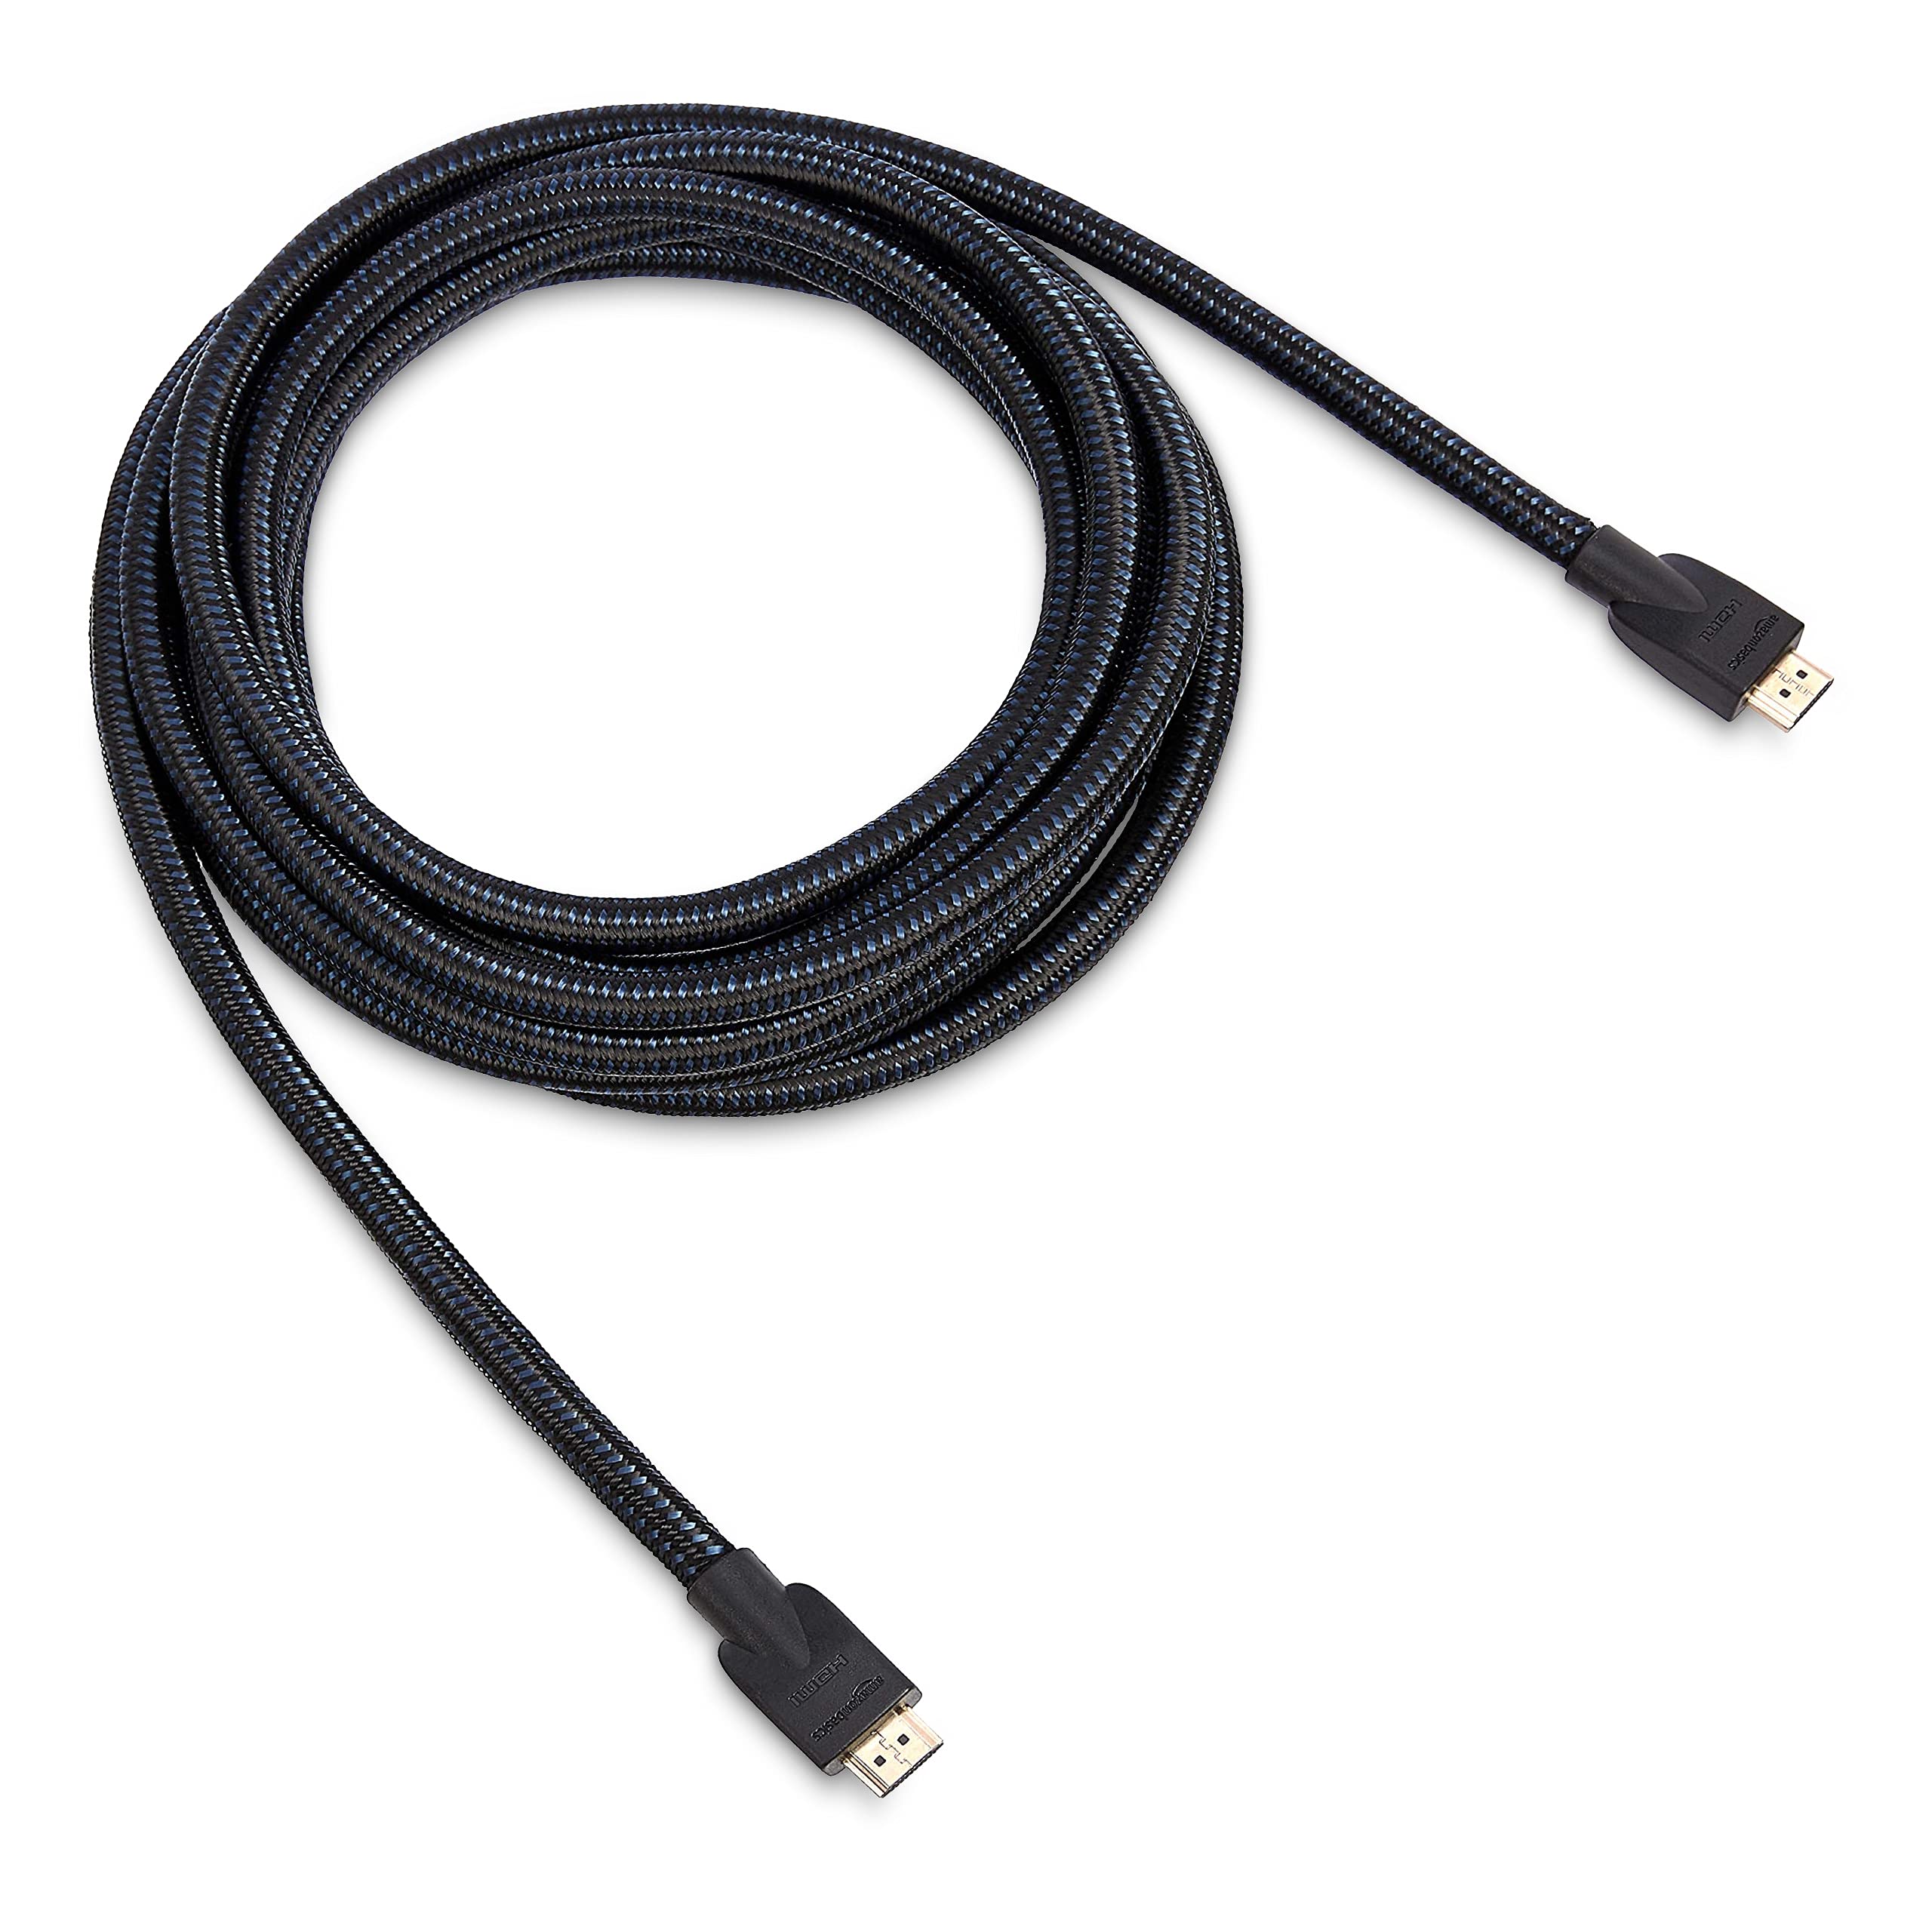 Amazon Basics High-Speed HDMI Cable (18Gbps, 4K/60Hz) - 15 Feet, Nylon-Braided for Television